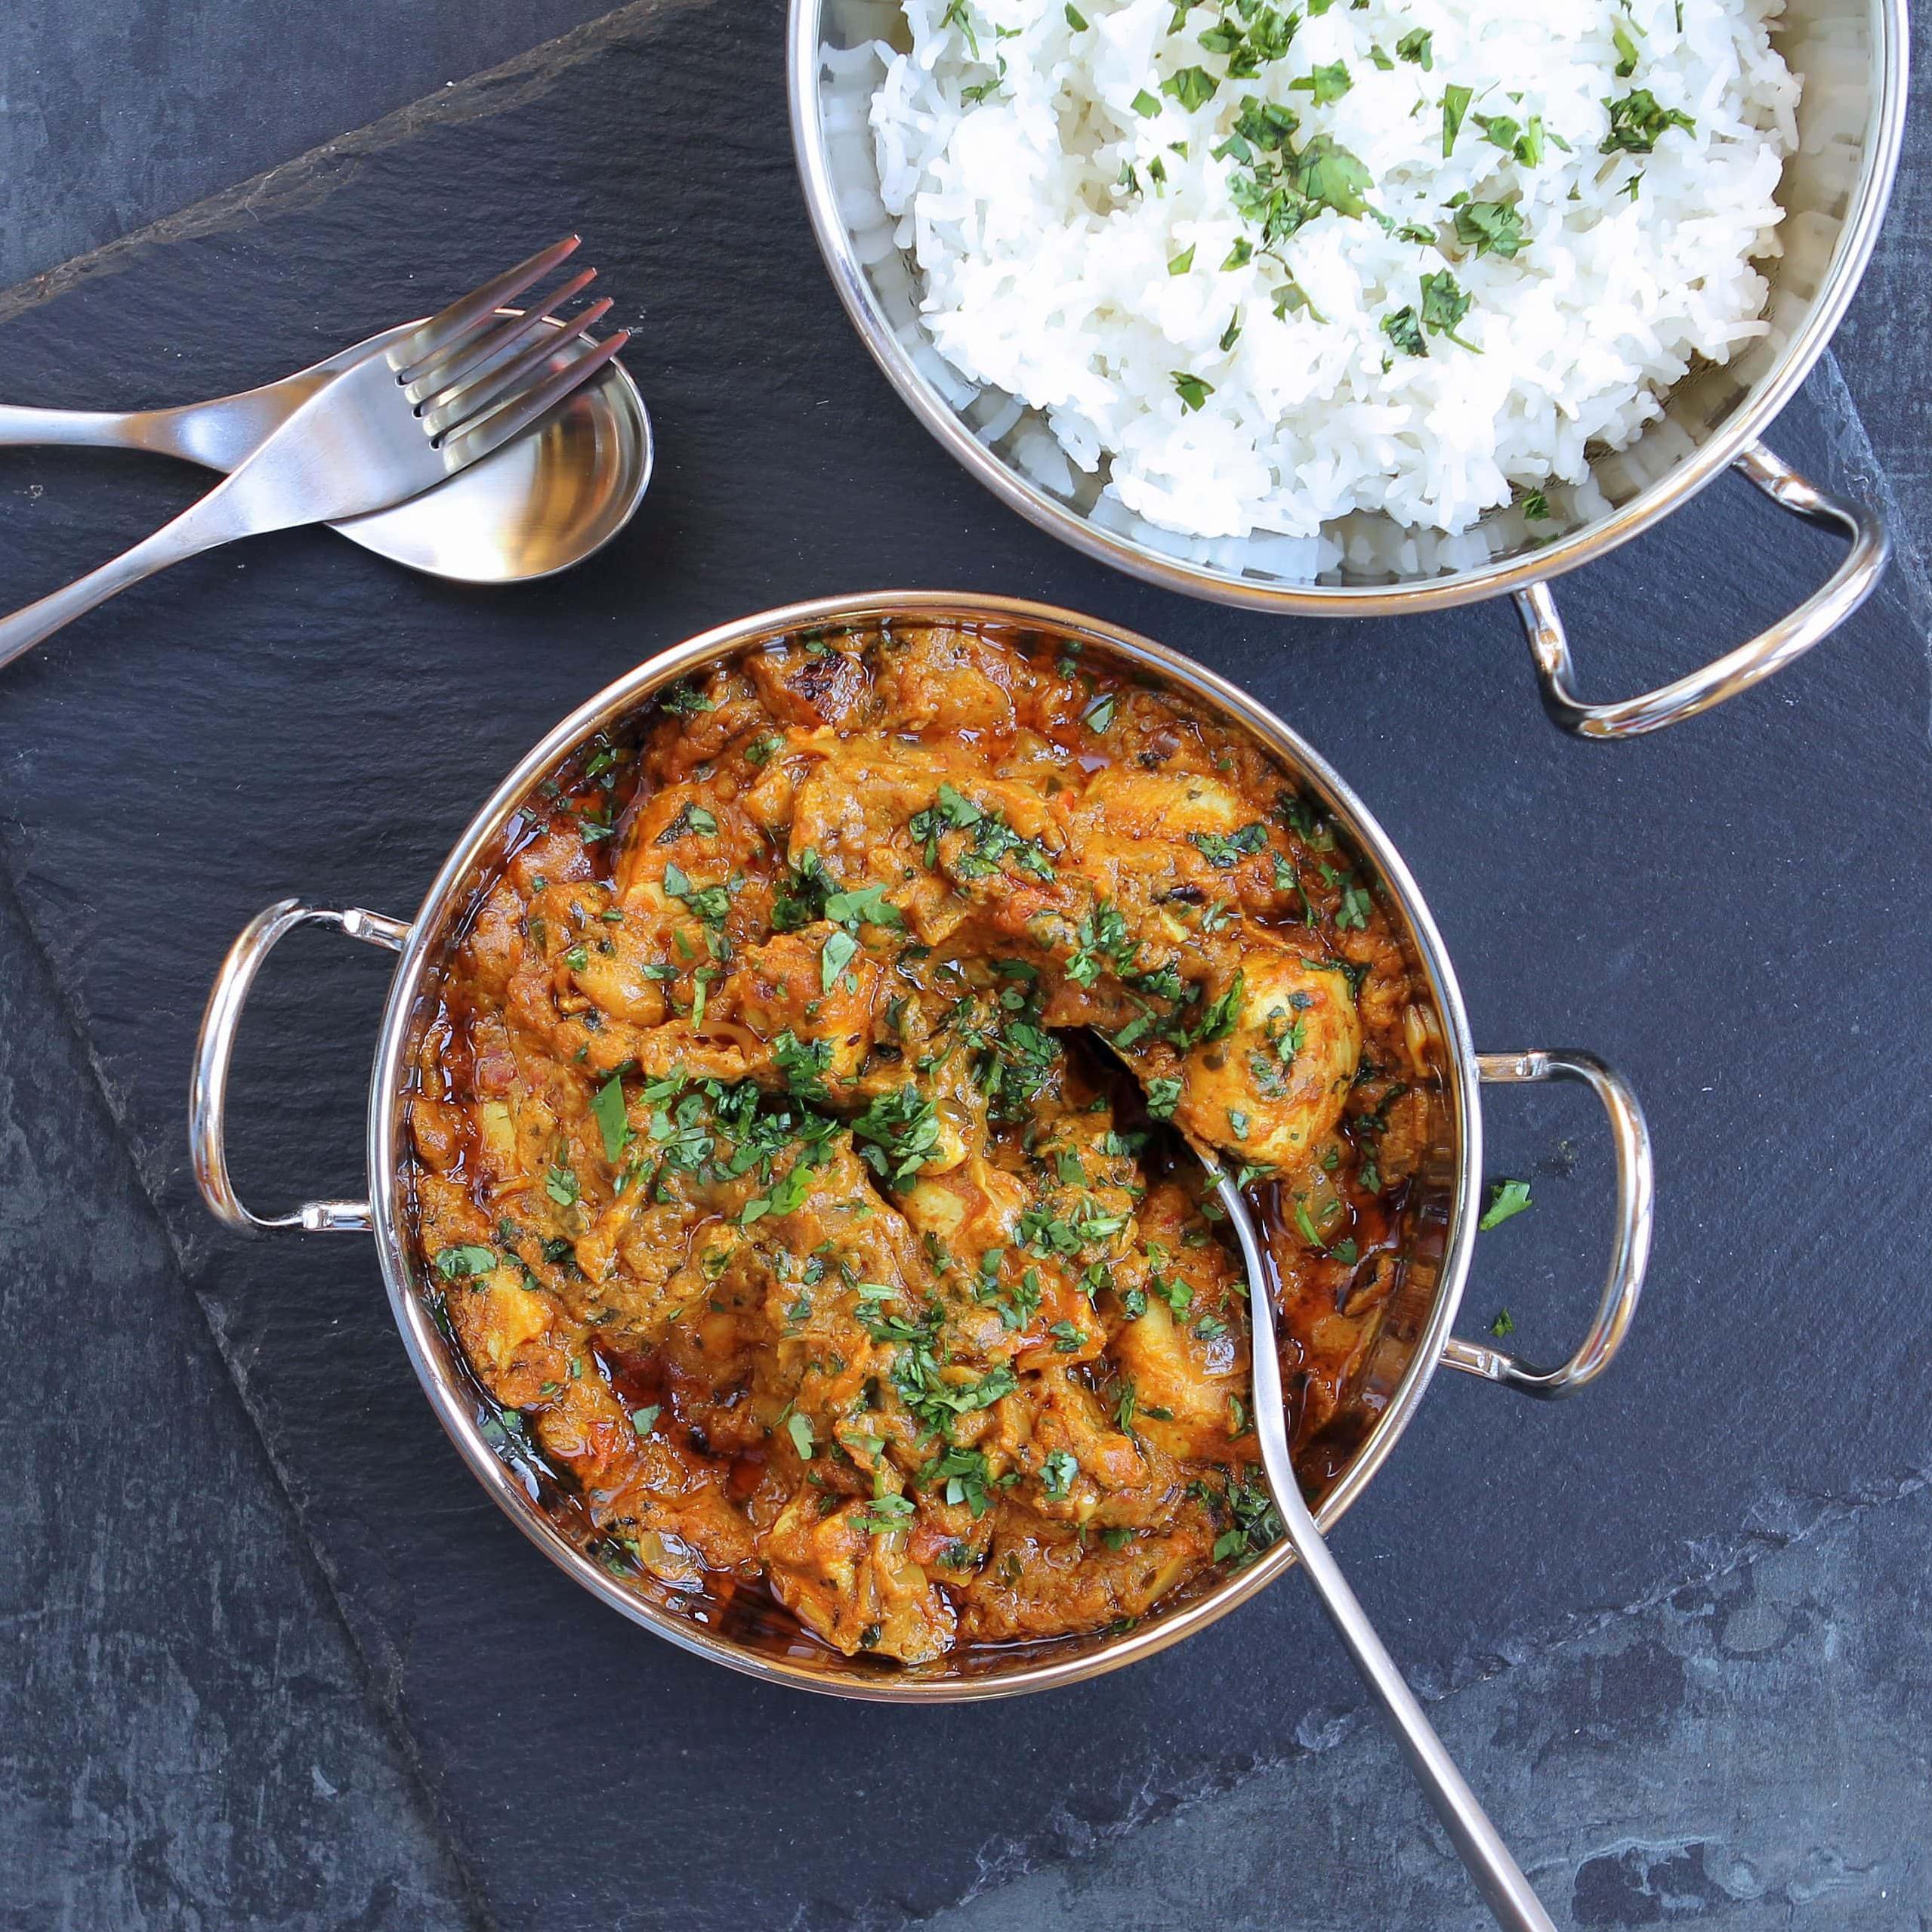  Don't let gluten hold you back from enjoying a hearty meal like this chicken curry.